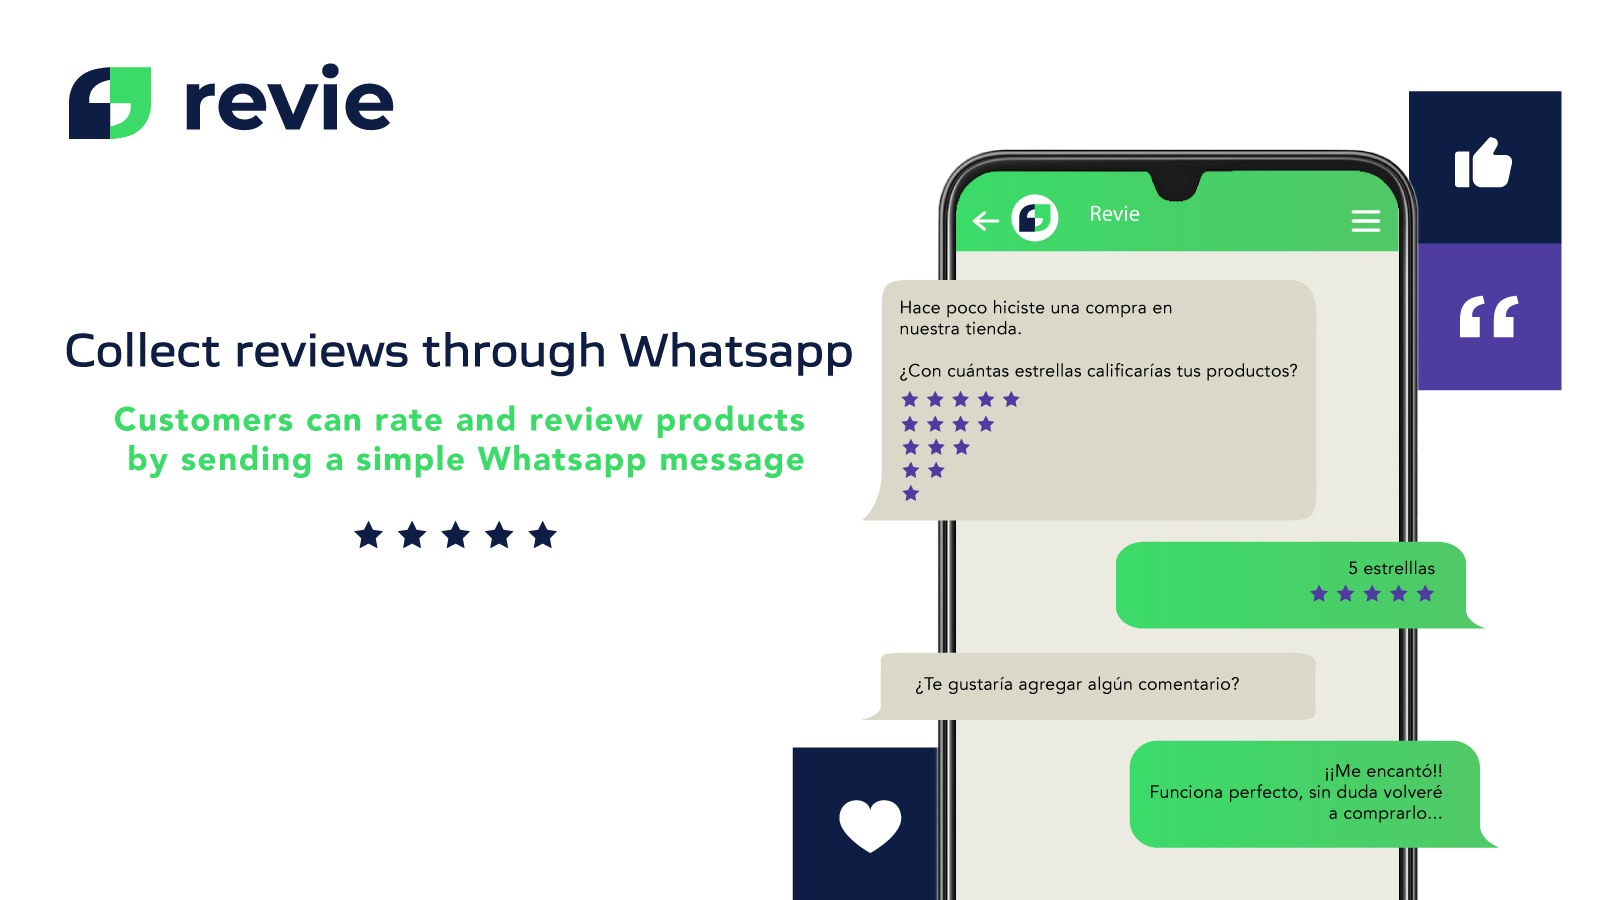 Collect reviews by using Whatsapp